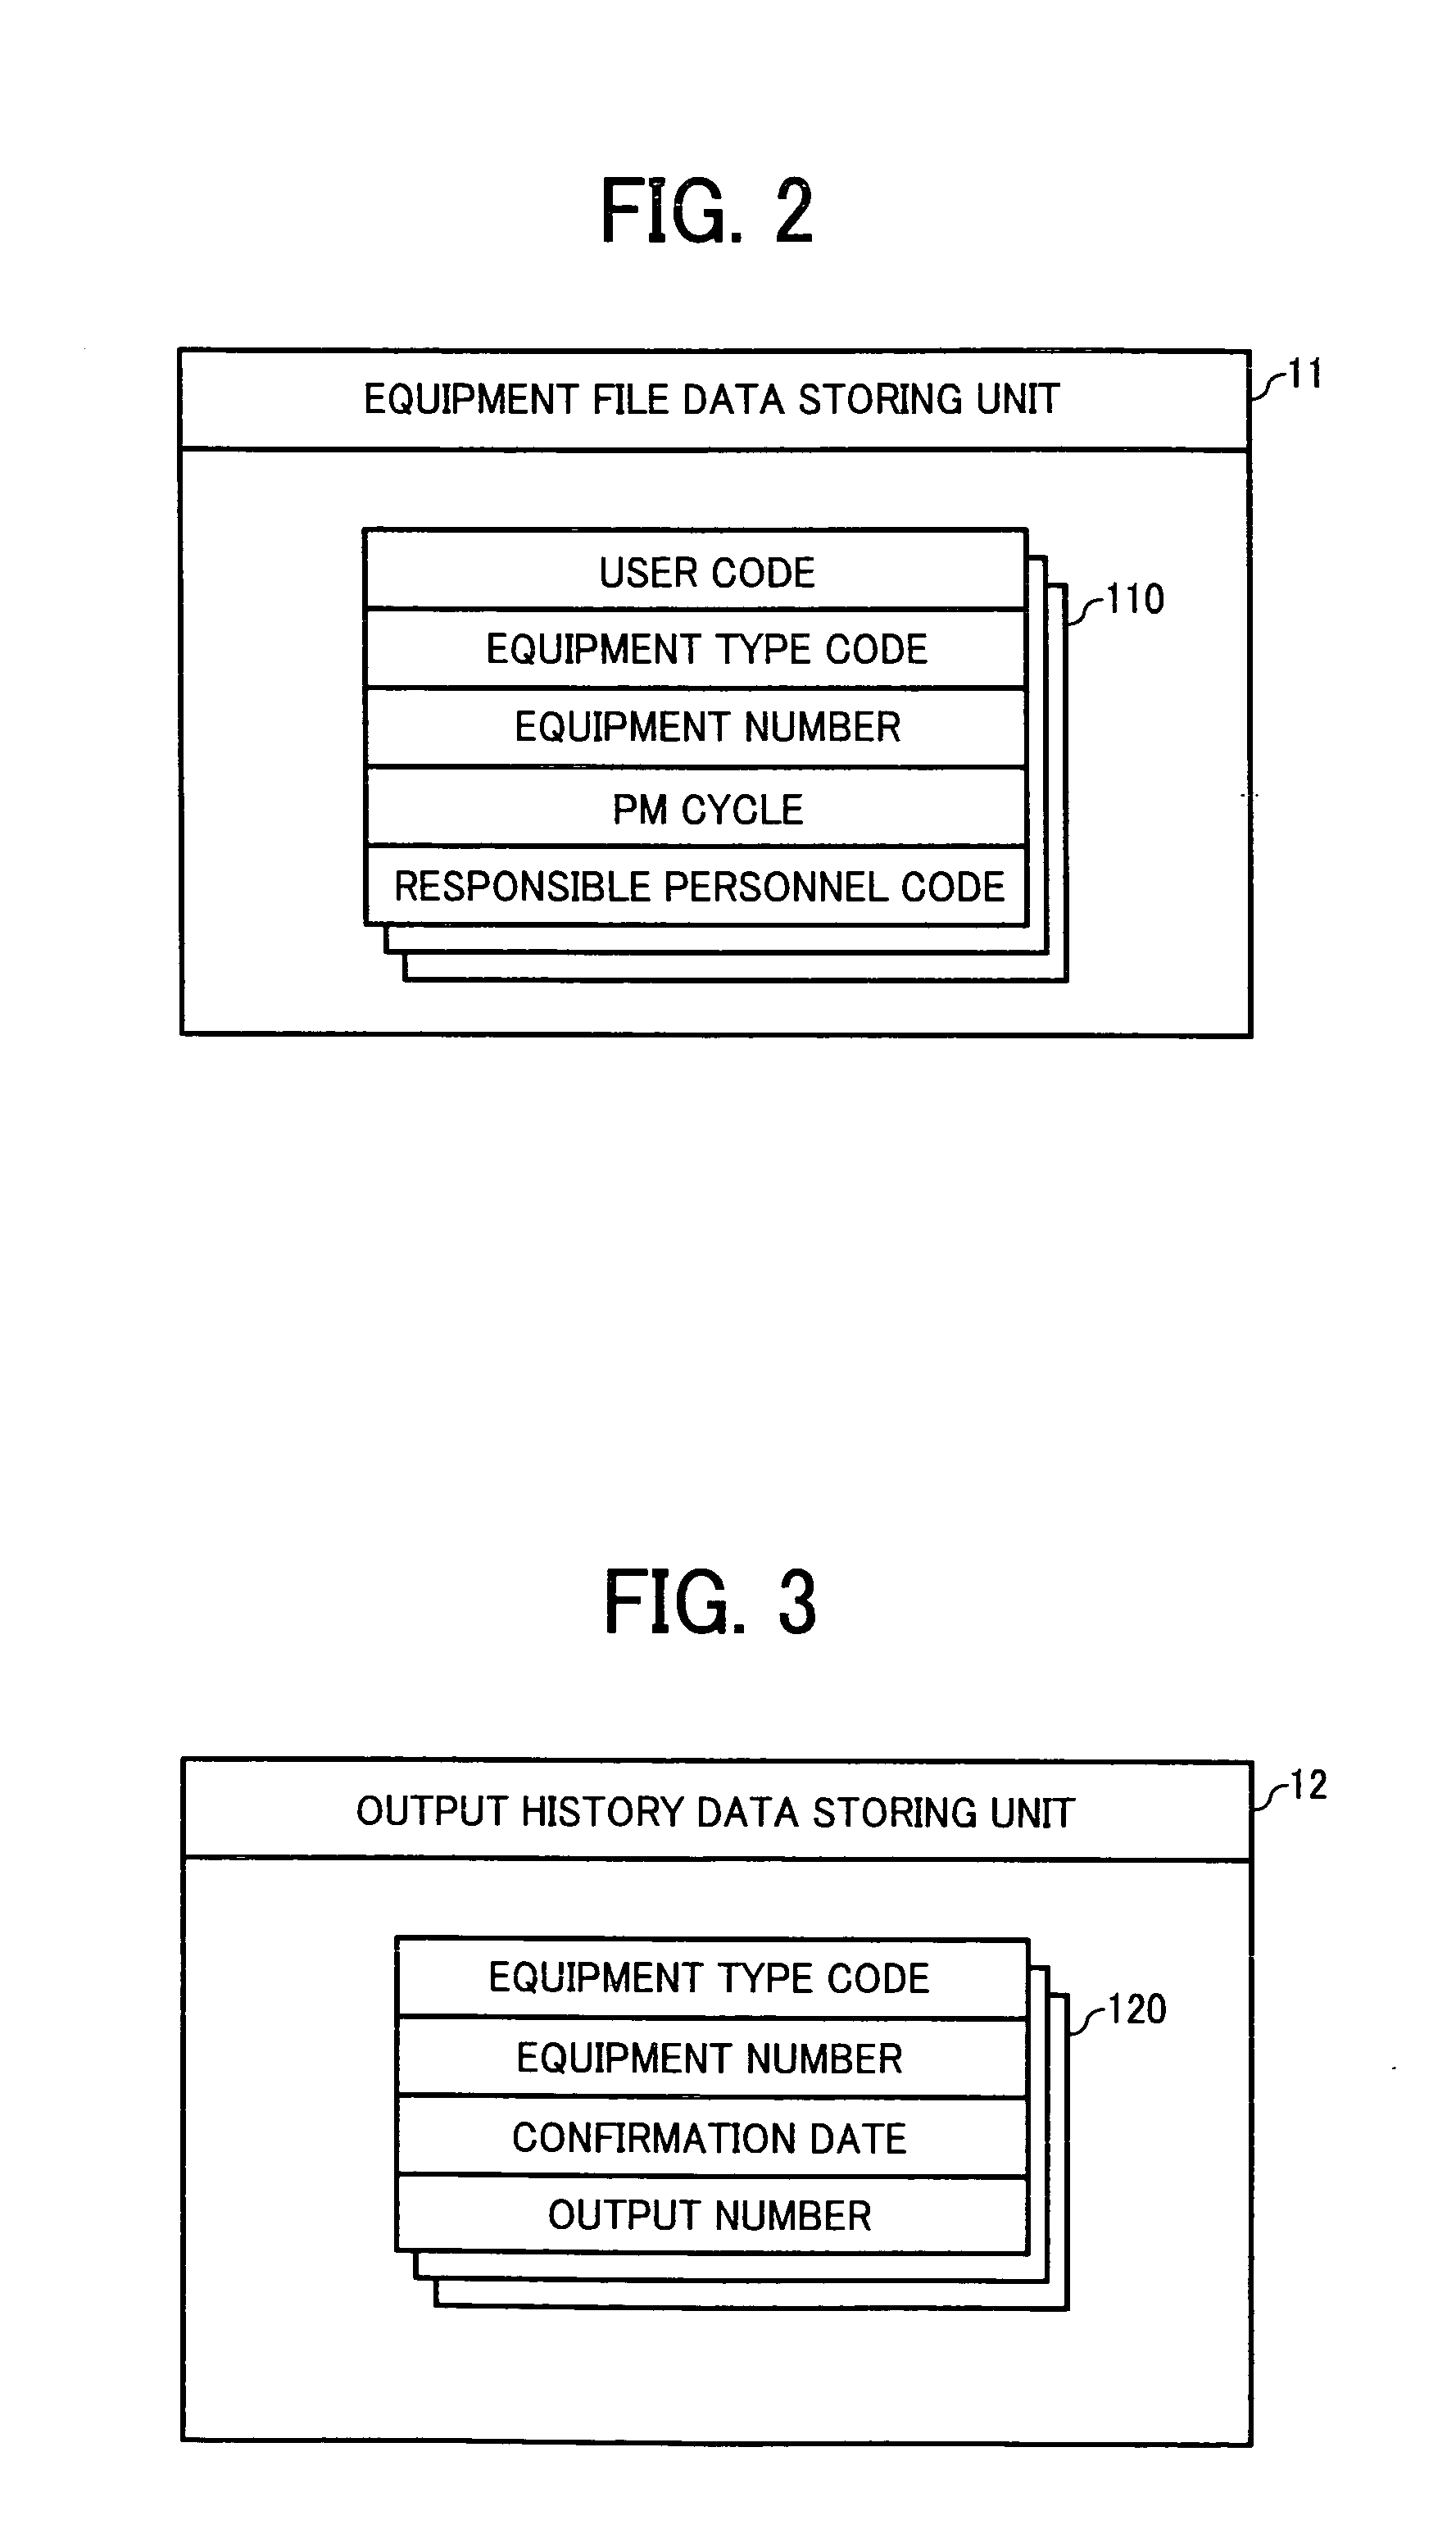 Replacement part order processing apparatus, method for ordering replacement parts and computer-readable recording medium